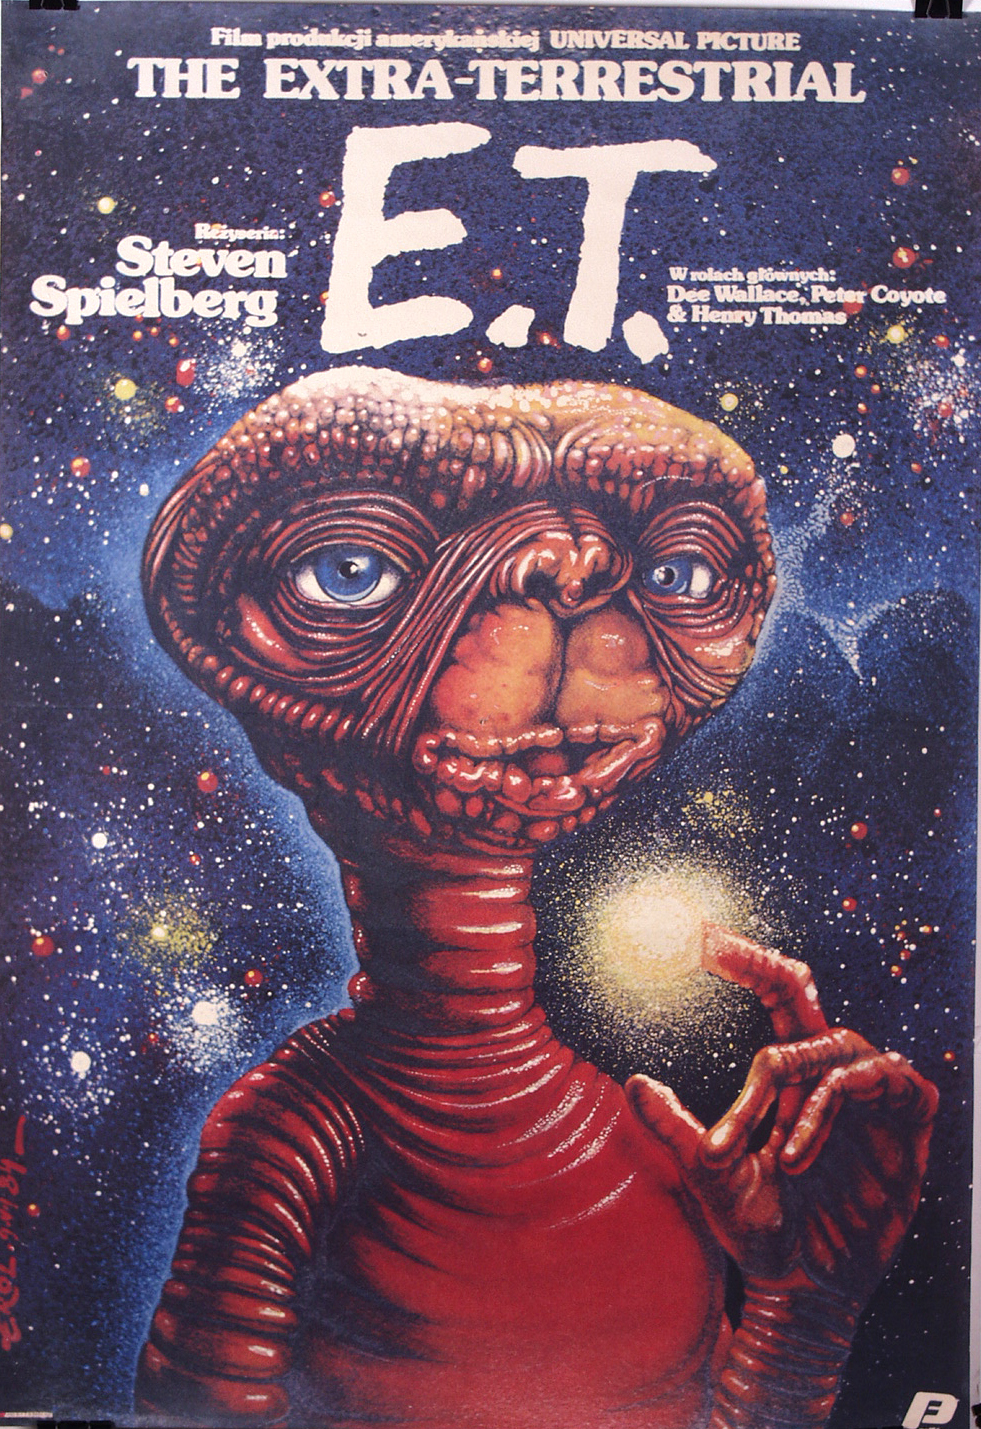 Stoned E.T. and 12 Other Crazy European Movie Poster Designs ...